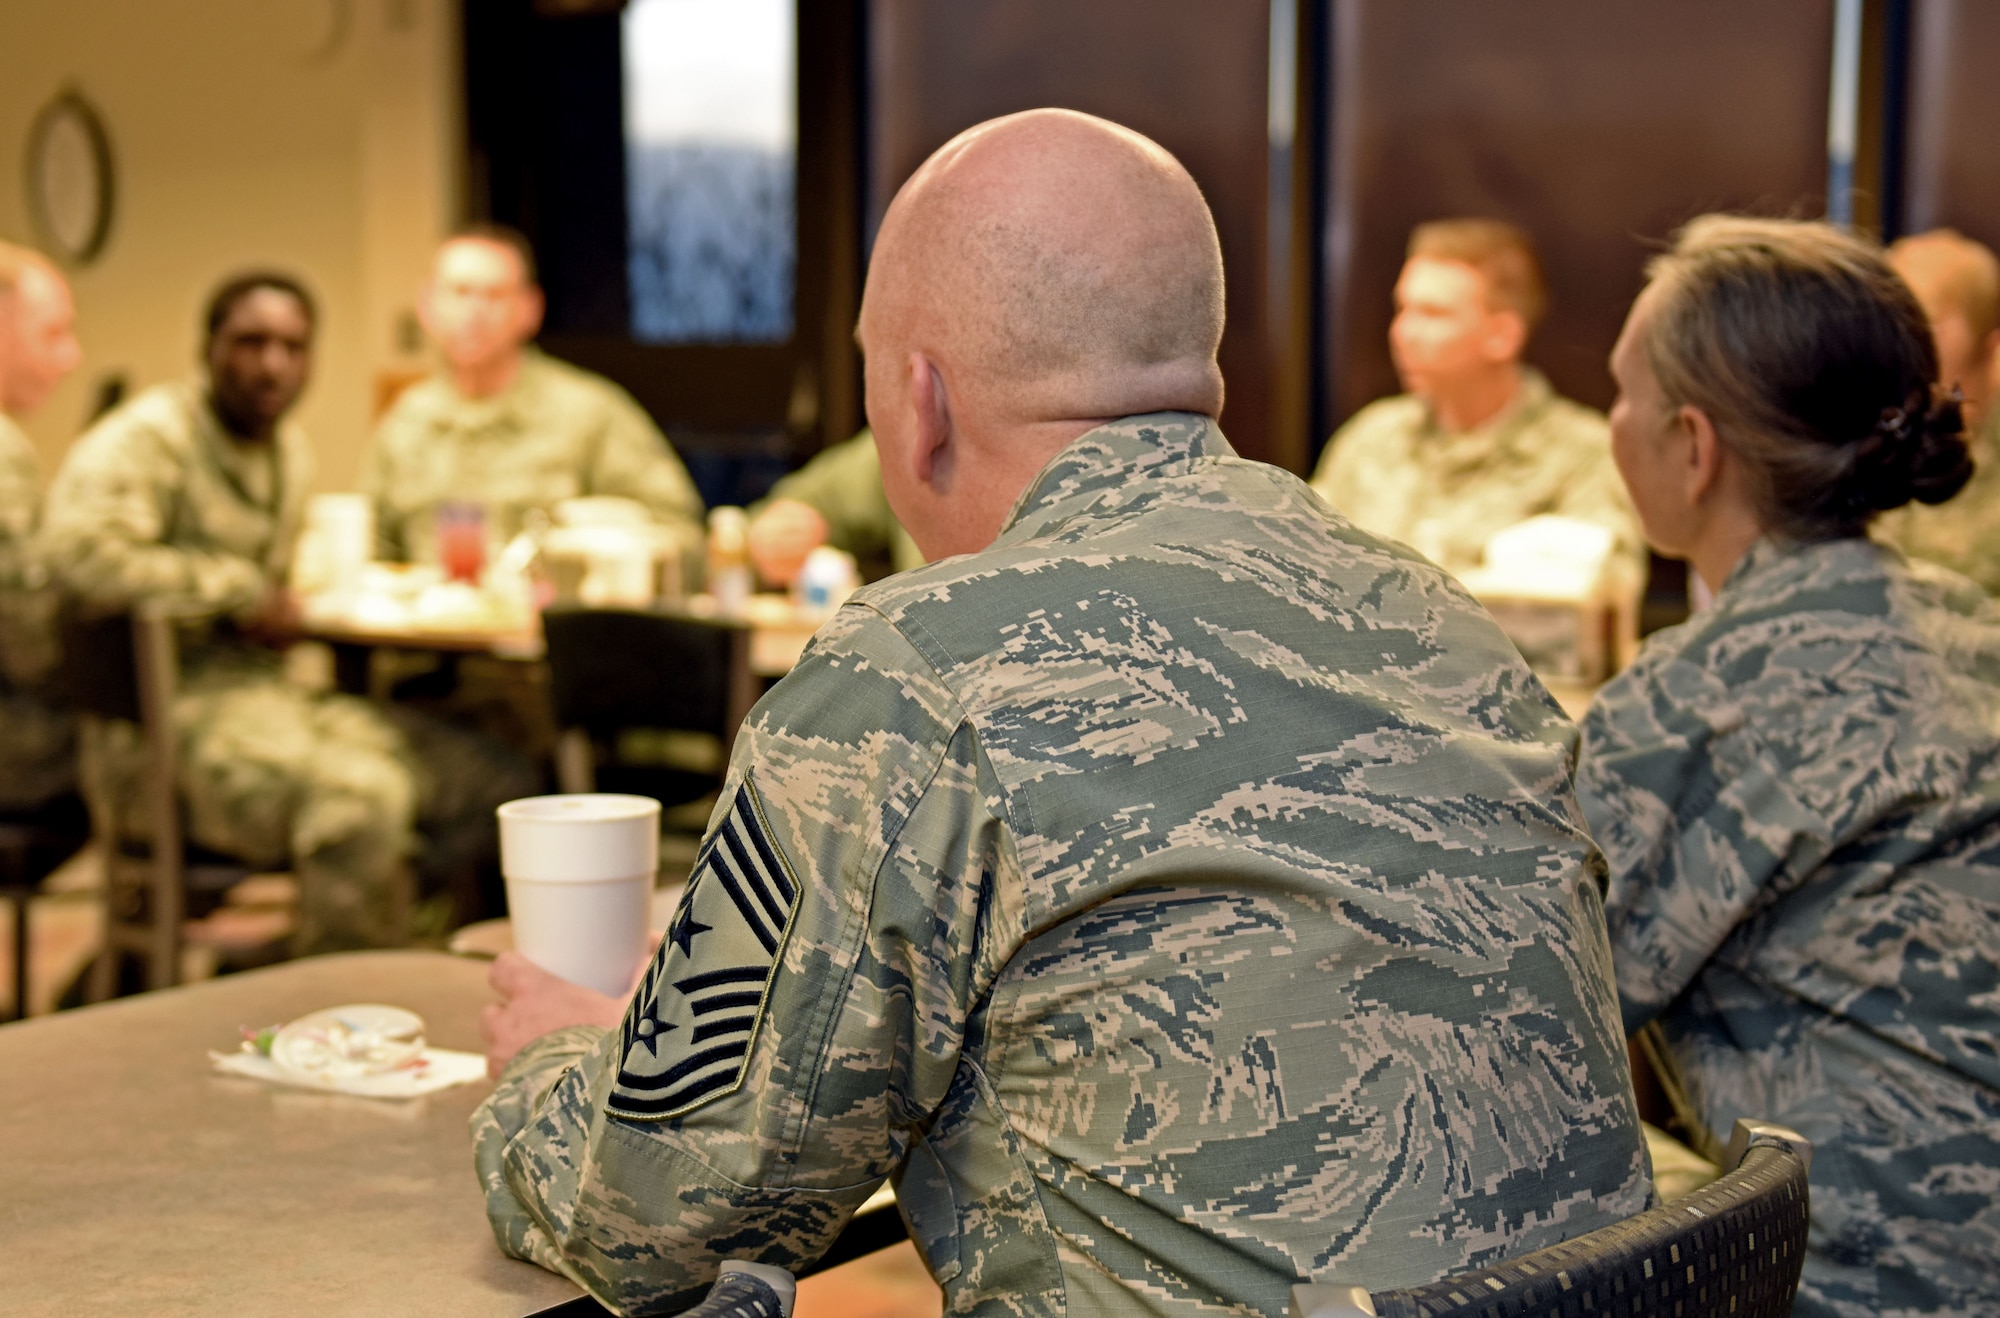 Col. Traci Kueker-Murphy, 310th Space Wing commander, and Command Chief Master Sgt. Todd Scott met with Reserve Citizen Airmen, ranked E-1 through E-4, to discuss Air Force Reserve policy changes and answer any questions the Airmen might have on Sunday, Jan. 7, 2018.